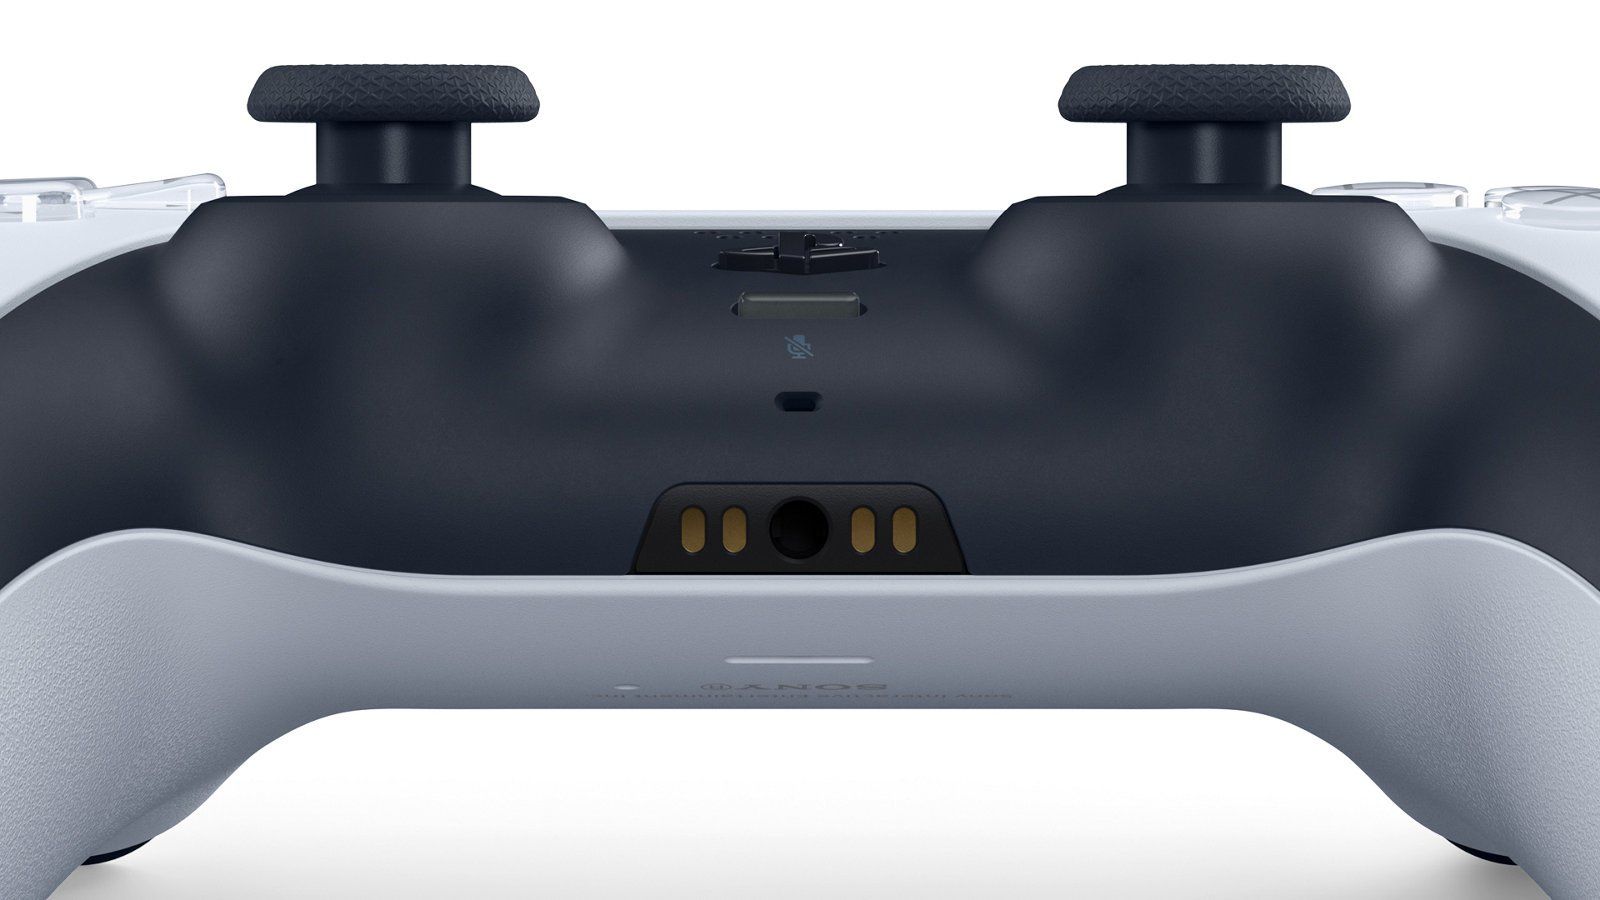 PS5 DualSense Battery Life, HD Camera and Pulse Headset Details Revealed